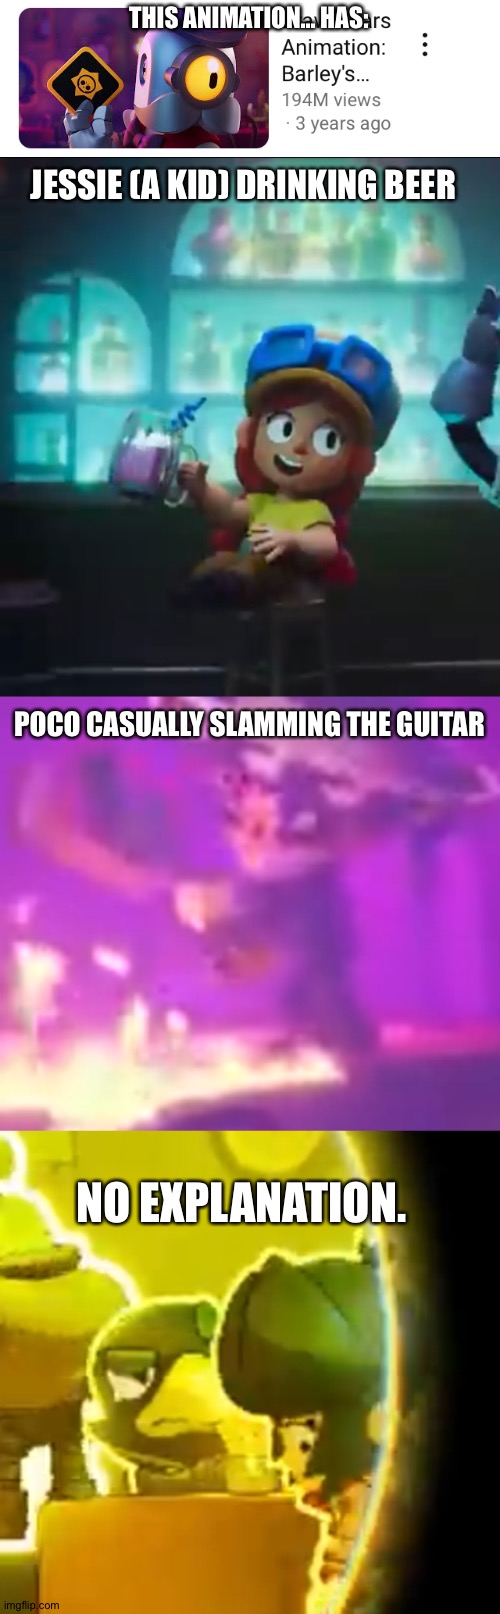 Damn the barley animation is weird | THIS ANIMATION... HAS:; JESSIE (A KID) DRINKING BEER; POCO CASUALLY SLAMMING THE GUITAR; NO EXPLANATION. | image tagged in brawl stars | made w/ Imgflip meme maker